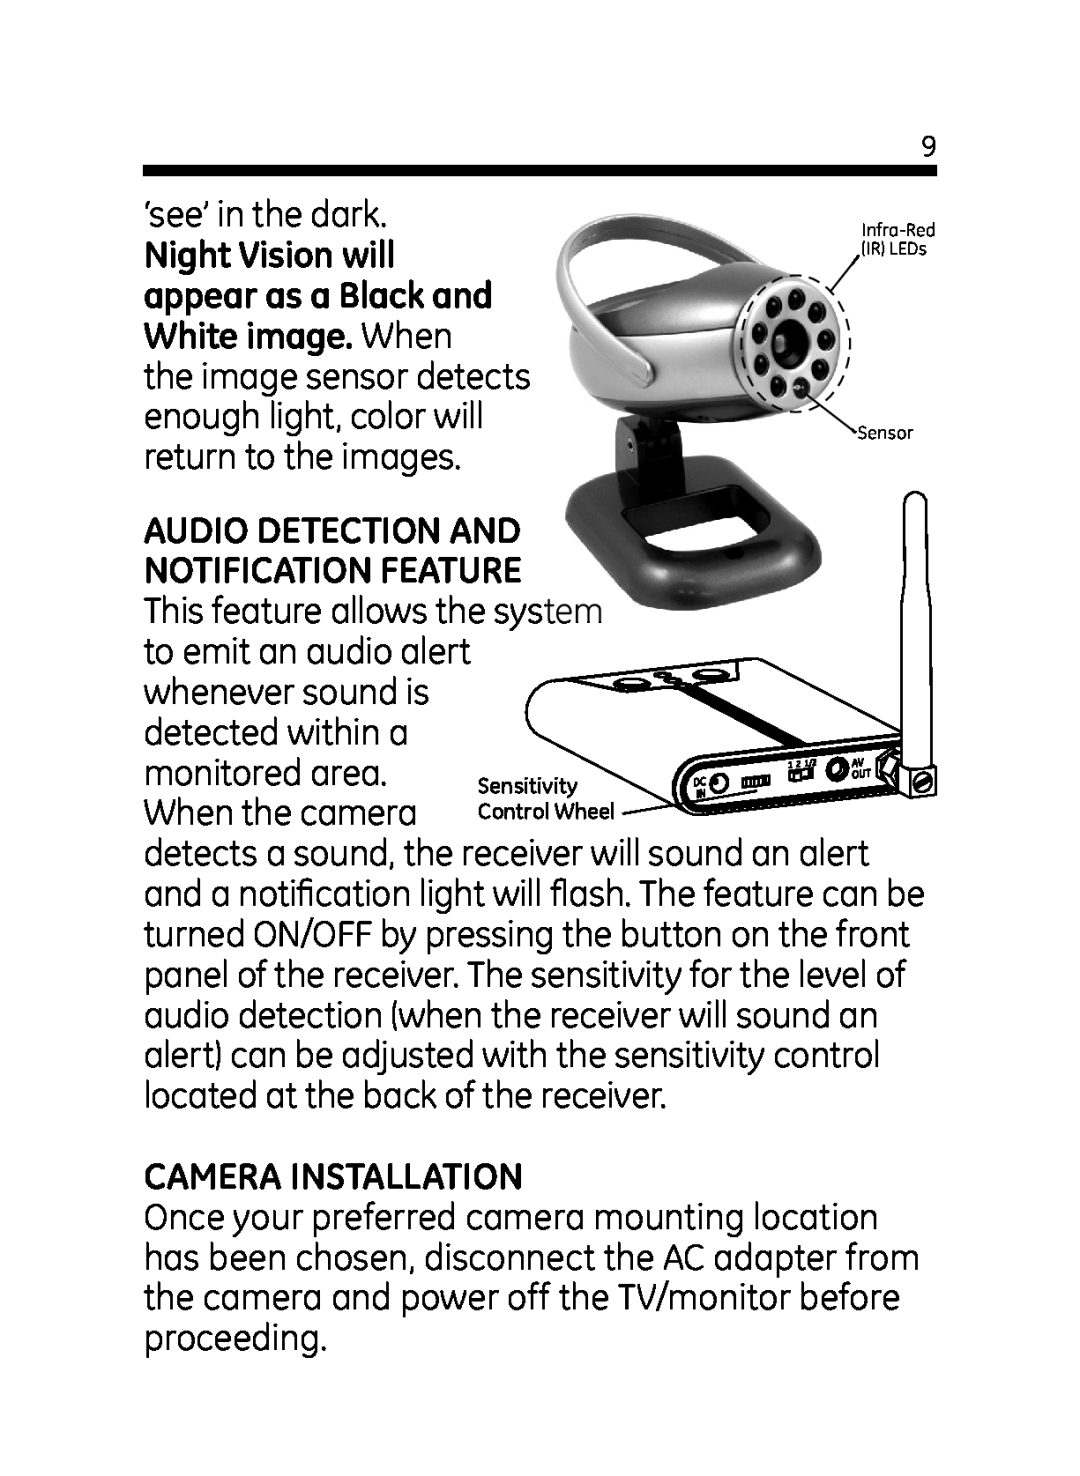 Jasco 45234 user manual Audio Detection And Notification Feature, Camera Installation 